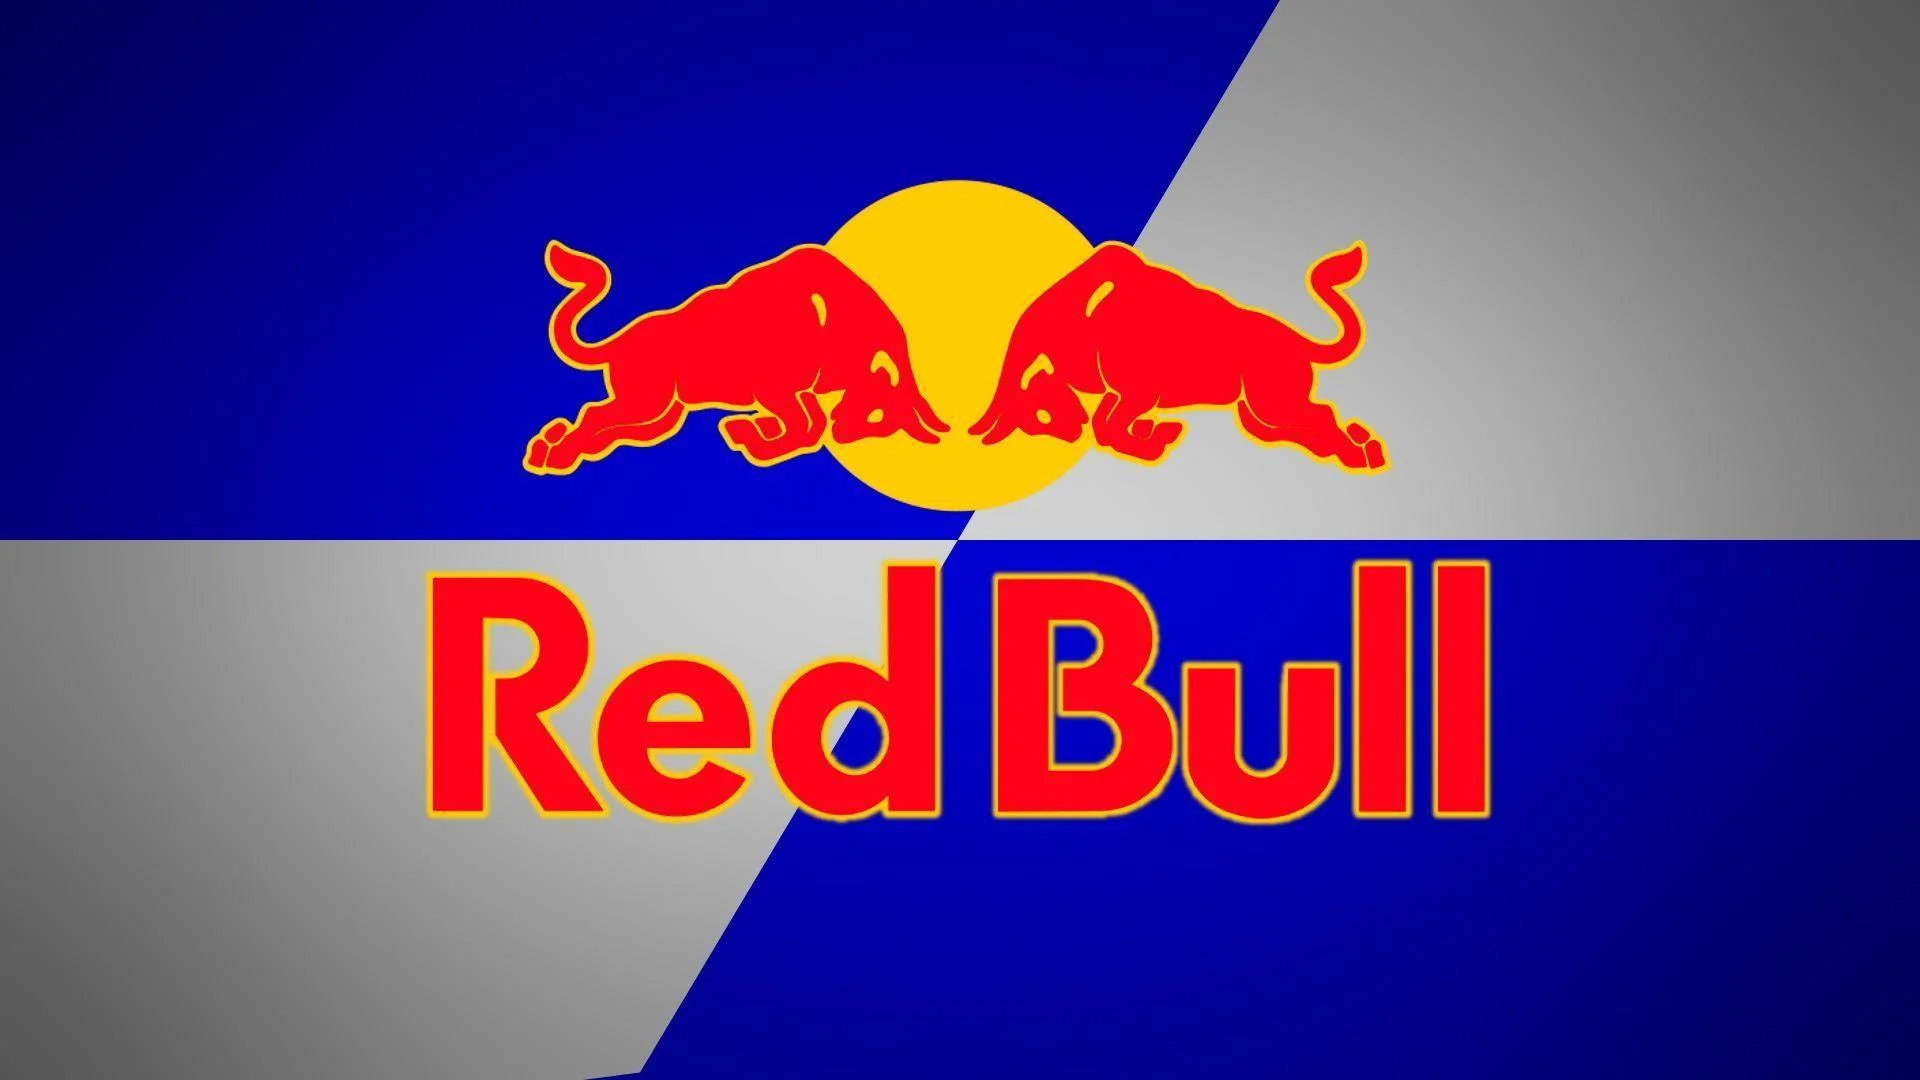 1920x1080 Red Bull Wallpapers Top Free Red Bull Backgrounds